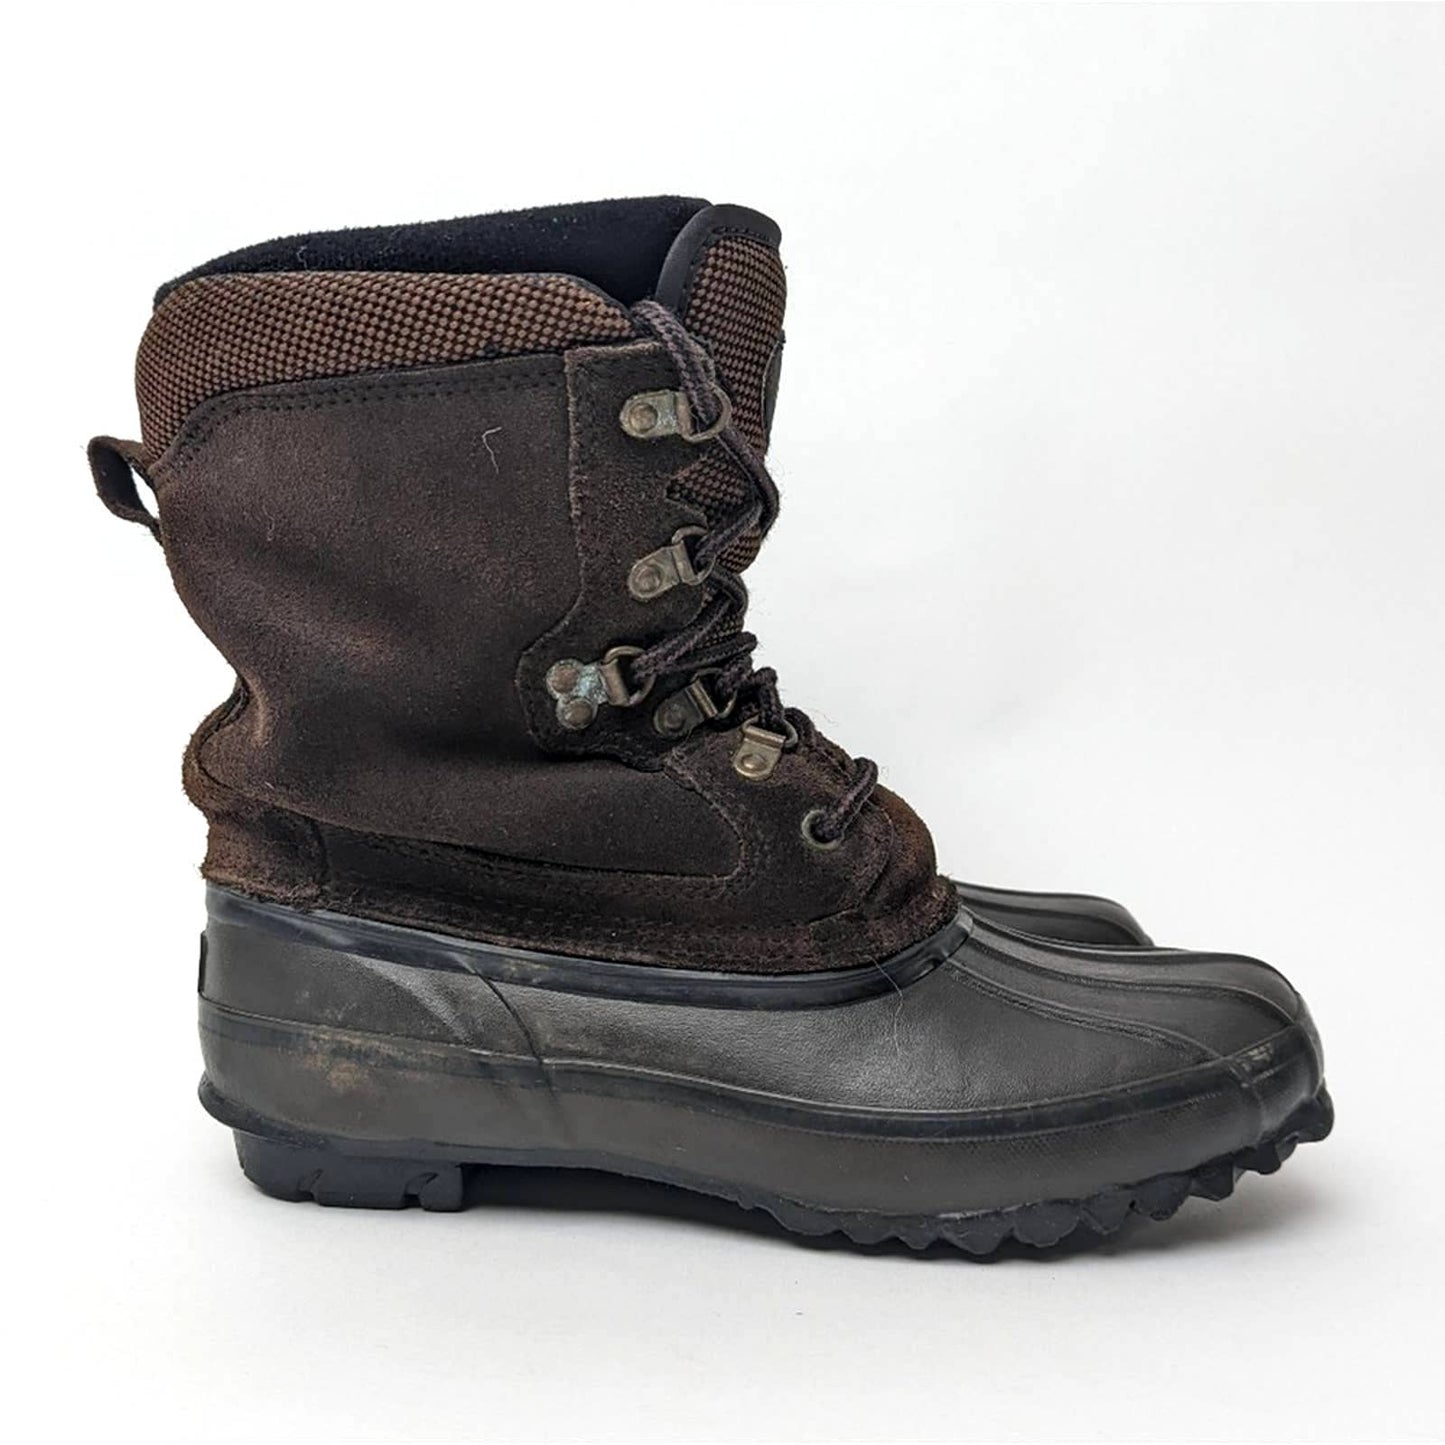 LaCrosse Thinsulate Leather Hunting Duck Boots